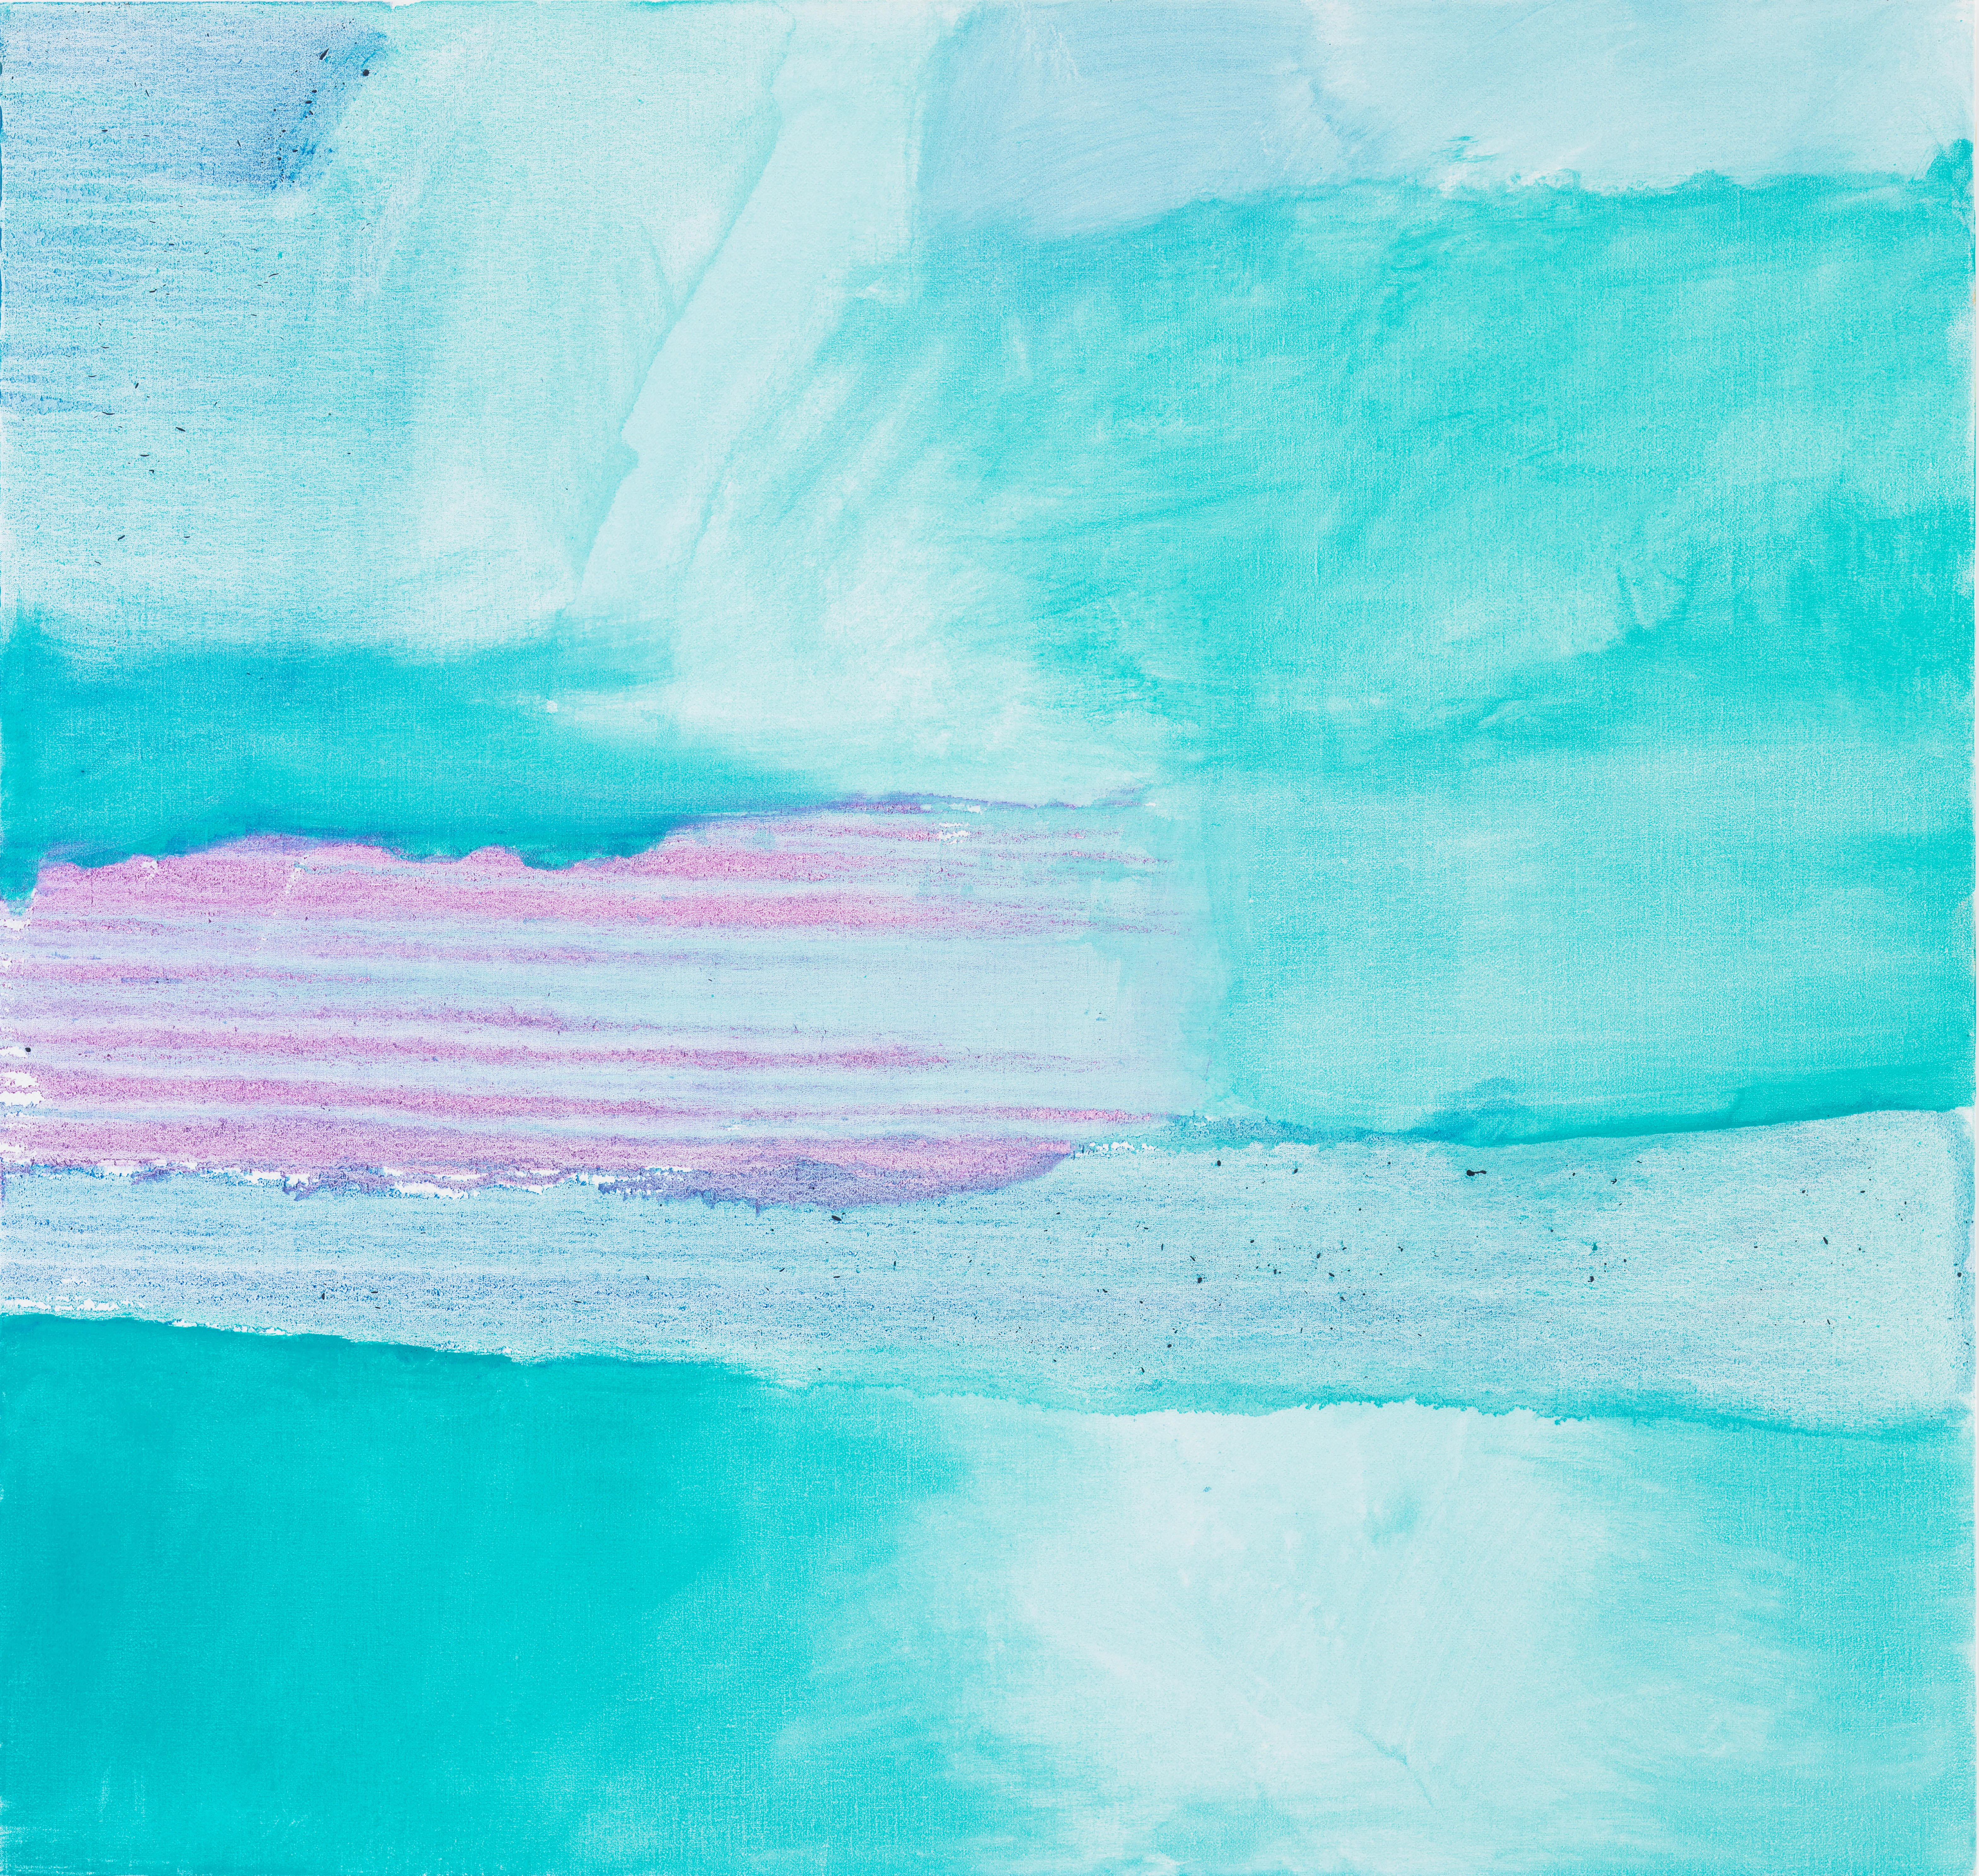 Becalmed by Emily Mason is an oil painting comprised of light green tones, with a light magenta horizontal form entering the composition in the center left.